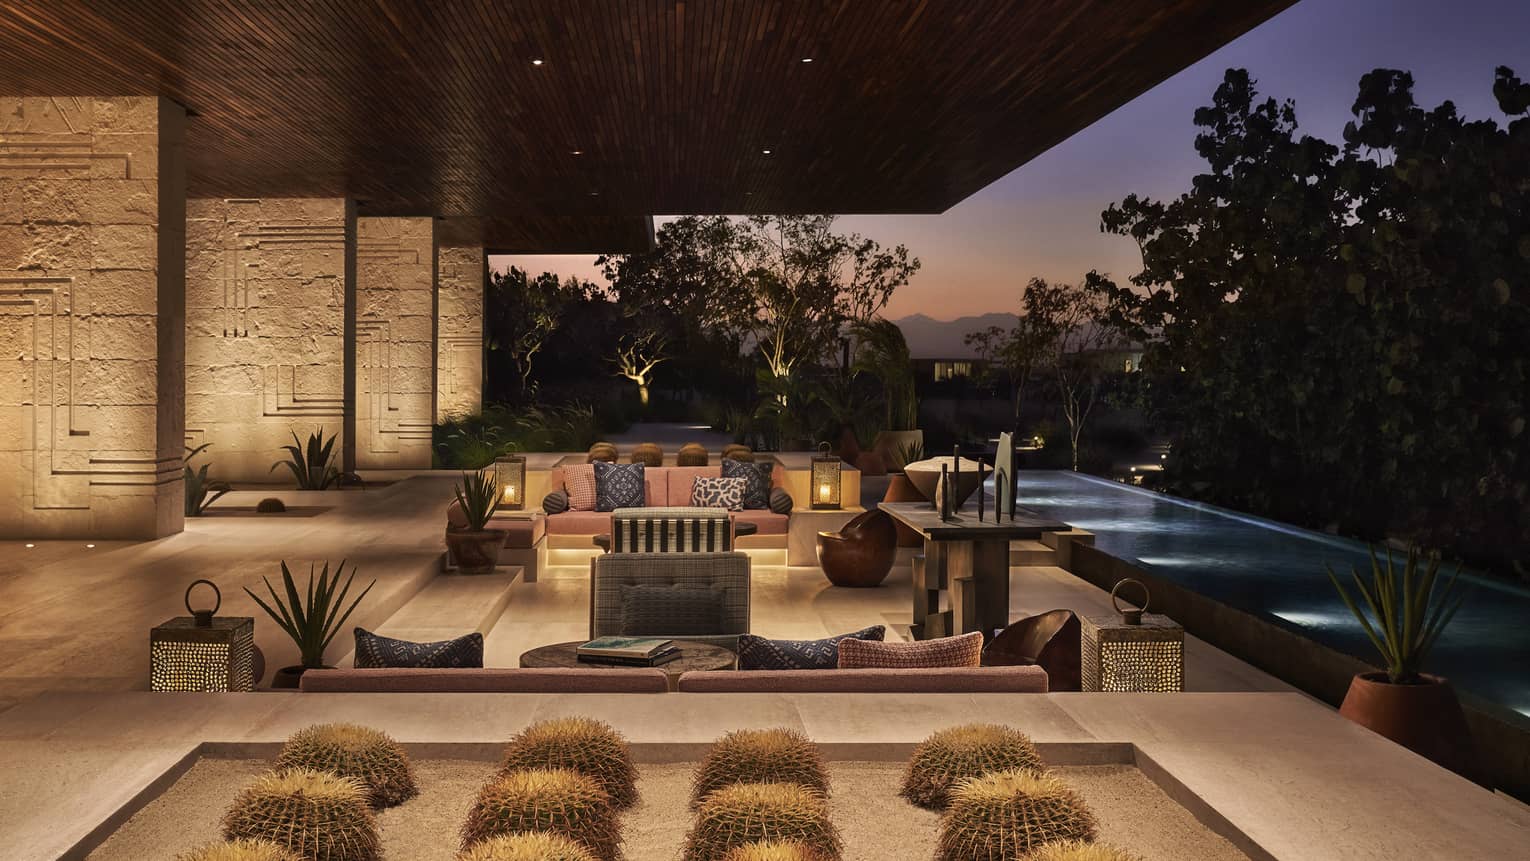 Open air lobby with cactus display, modern patio sofas at dusk